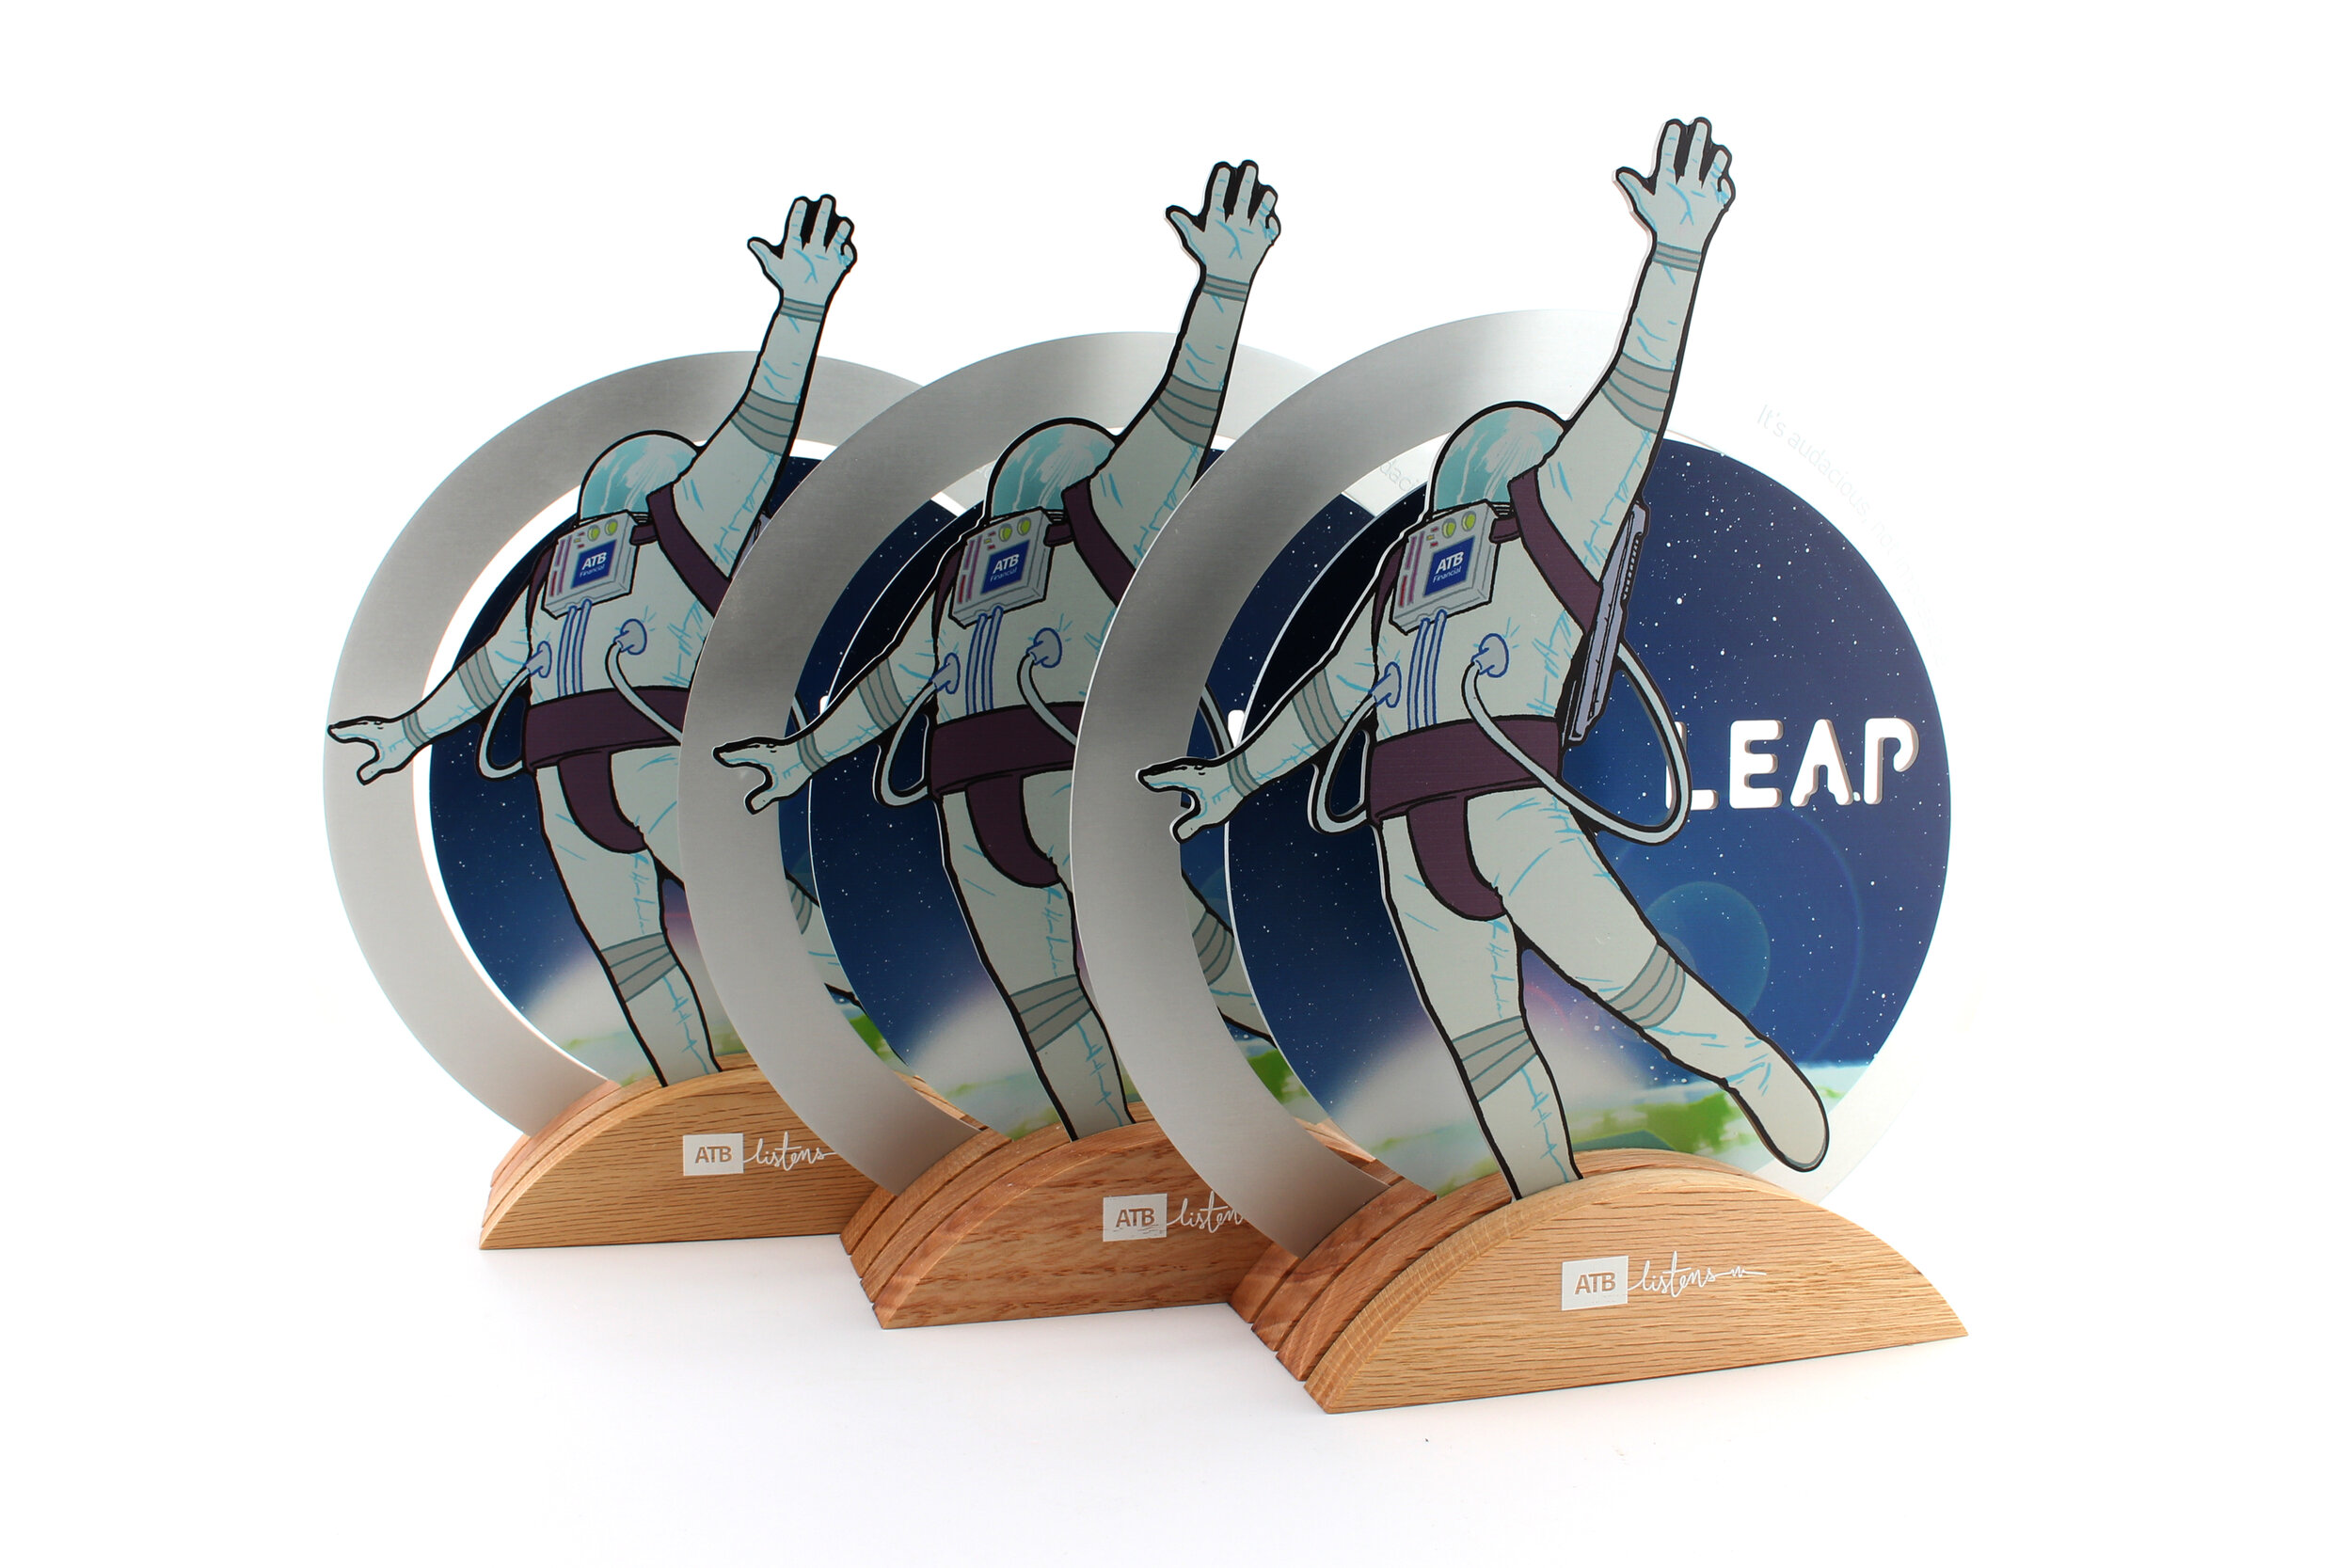 ATB leap awards for staff appreciation and workplace event high quality creative design 